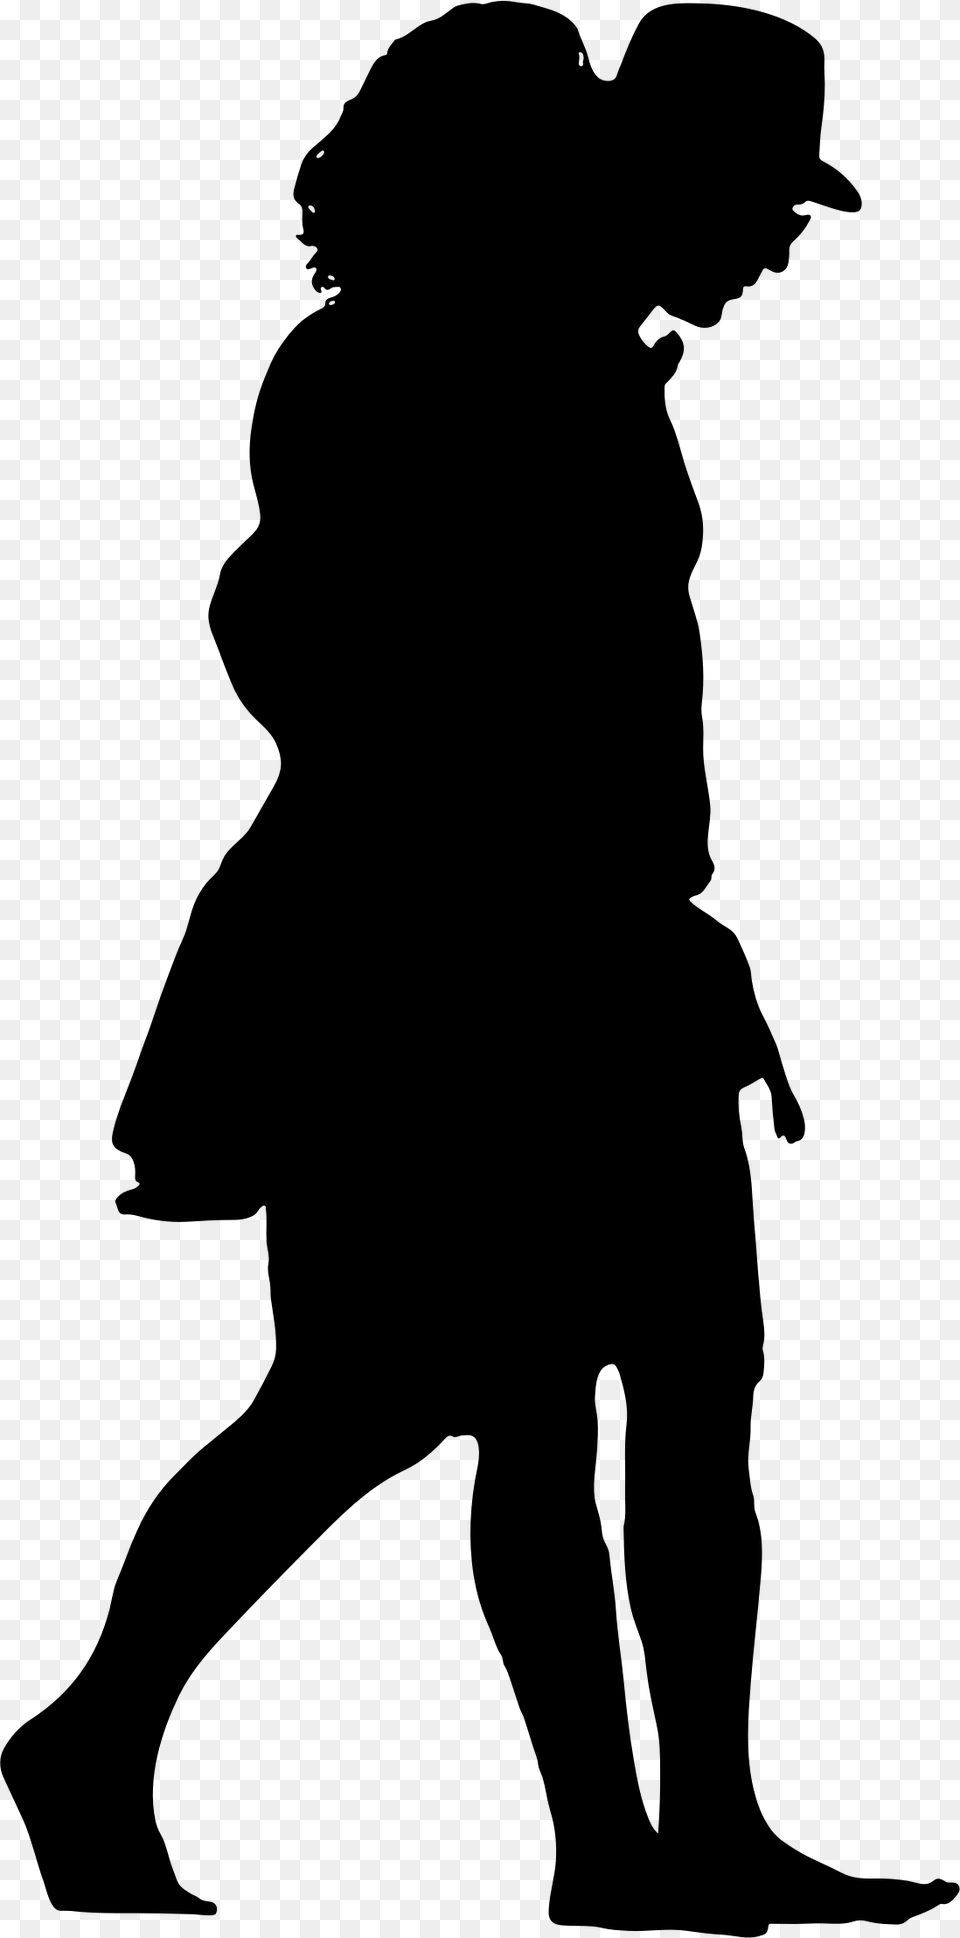 Person Walking Silhouette Download Black Silhouette People Walking, Gray Free Transparent Png